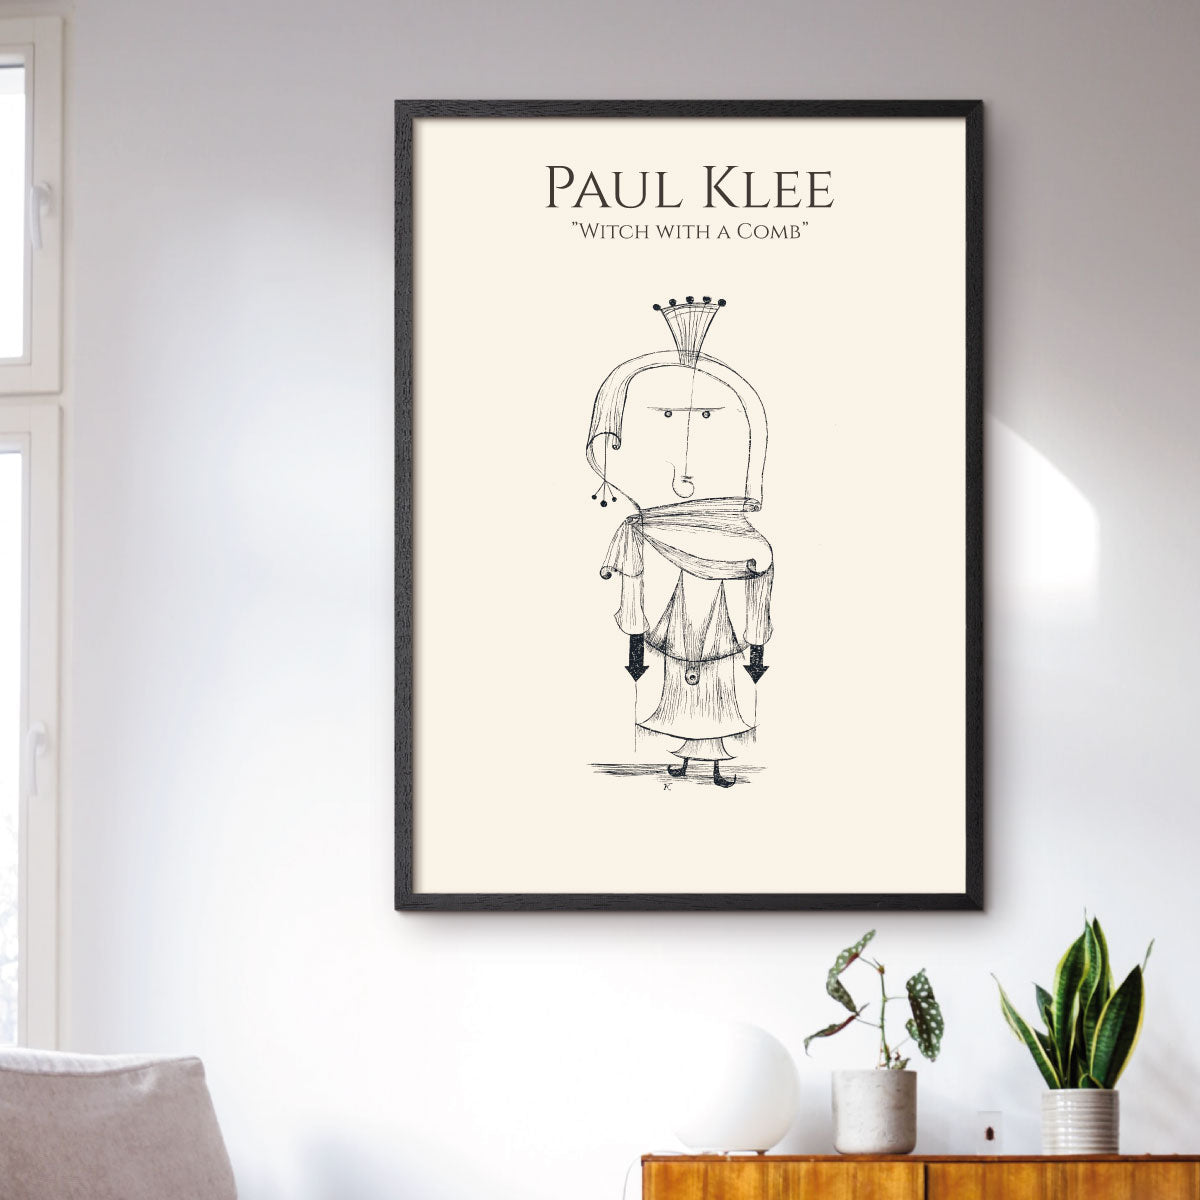 Art poster with Paul Klees "Wich with a comb"